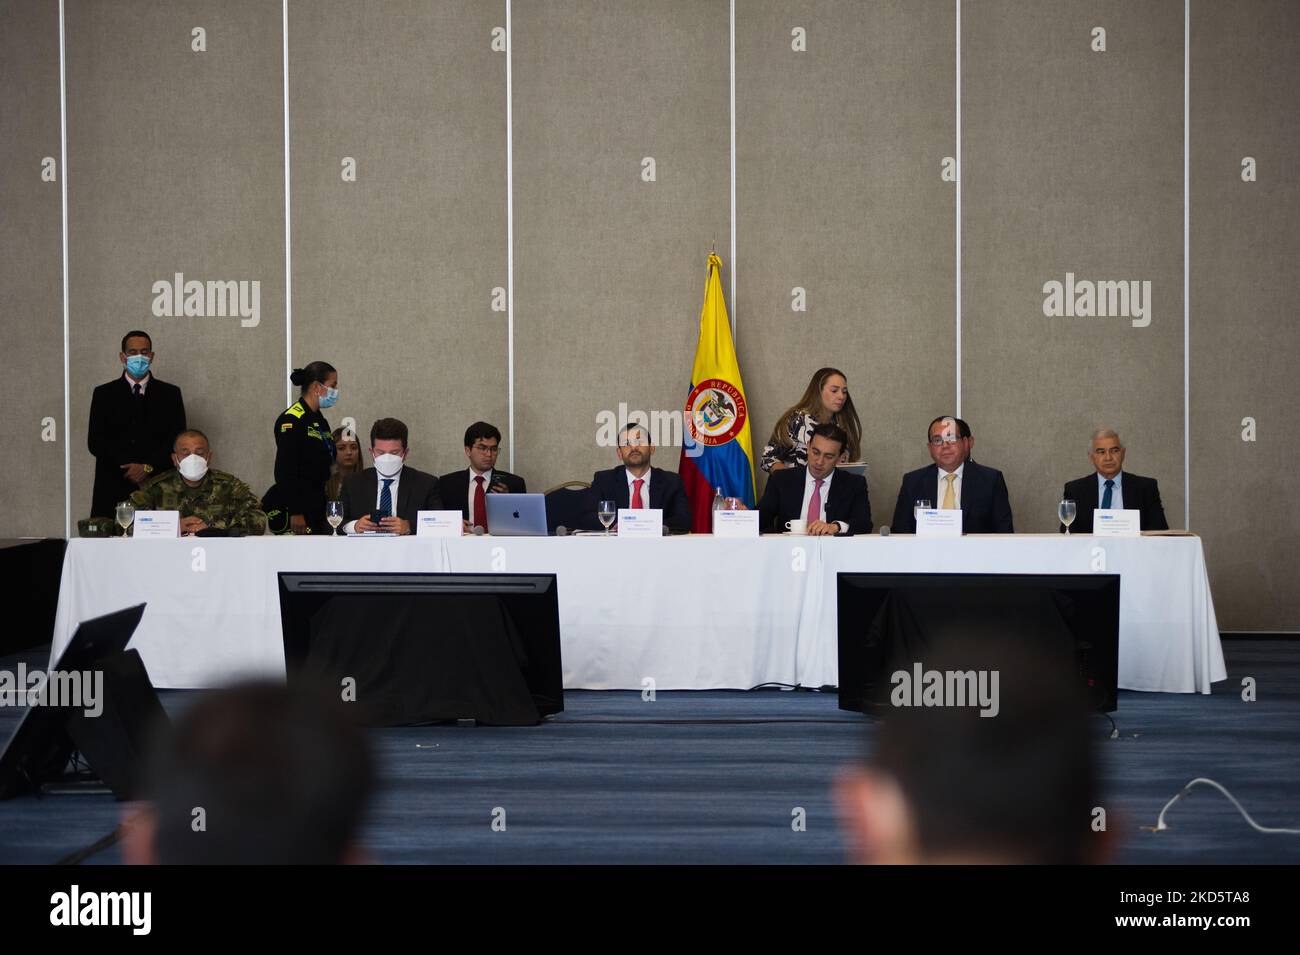 (Left to right) Army general Luis Fernando Navarro, Minister of Defense Diego Molano, Minister of the Interior Daniel Palacios and national registrar of Colombia Alexander Vega during a meeting of electoral guarantees where national registrar Alexander Vega opted not to do a new election count for the 2022 congressional elections, in Bogota, Colombia March 22, 2022. (Photo by Sebastian Barros/NurPhoto) Stock Photo